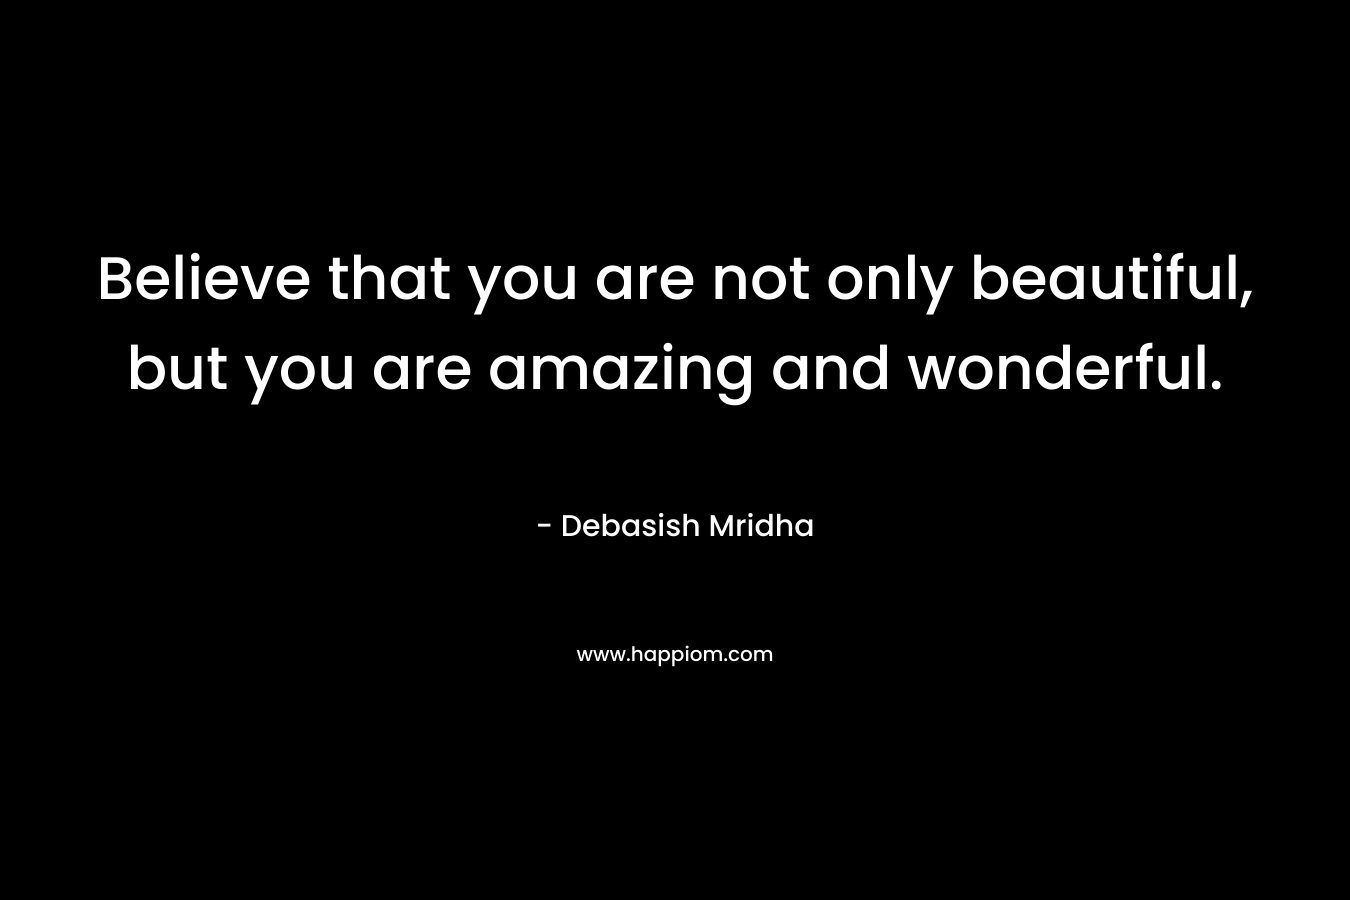 Believe that you are not only beautiful, but you are amazing and wonderful.